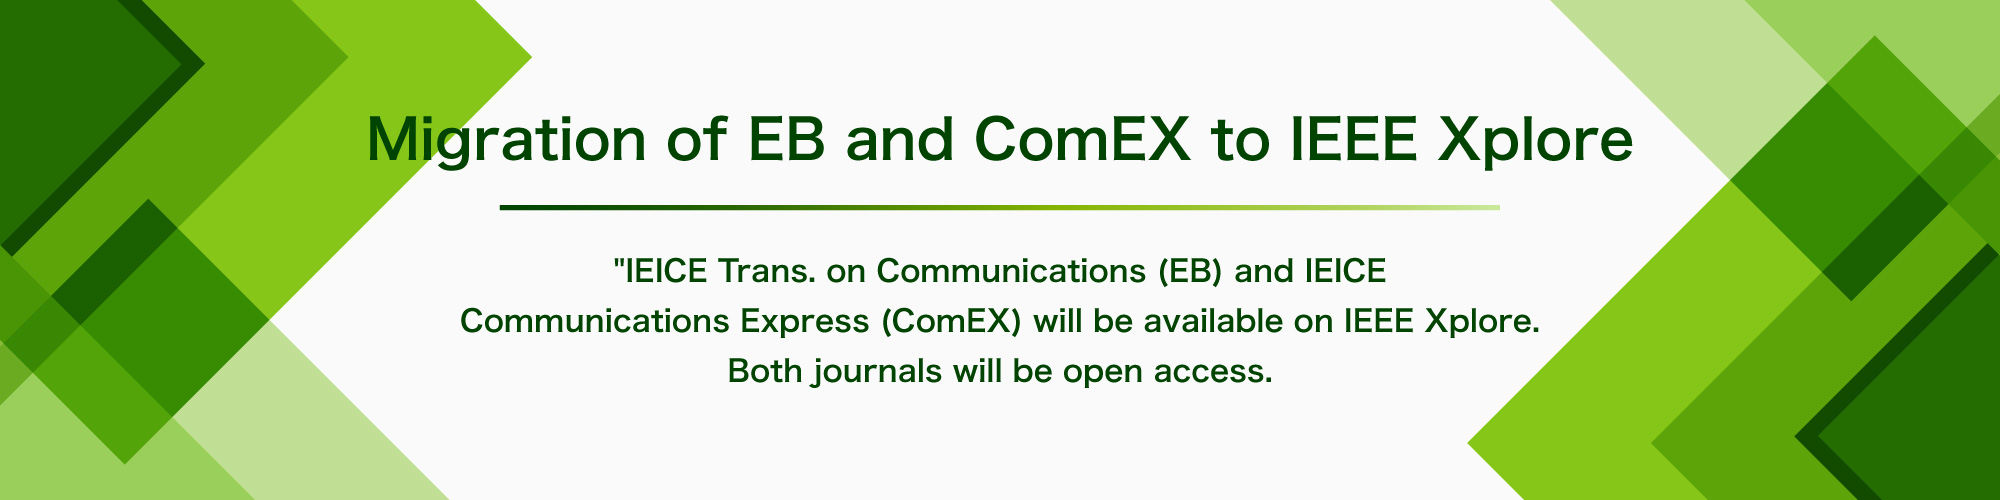 Migration of EB and ComEX to IEEE Xplore